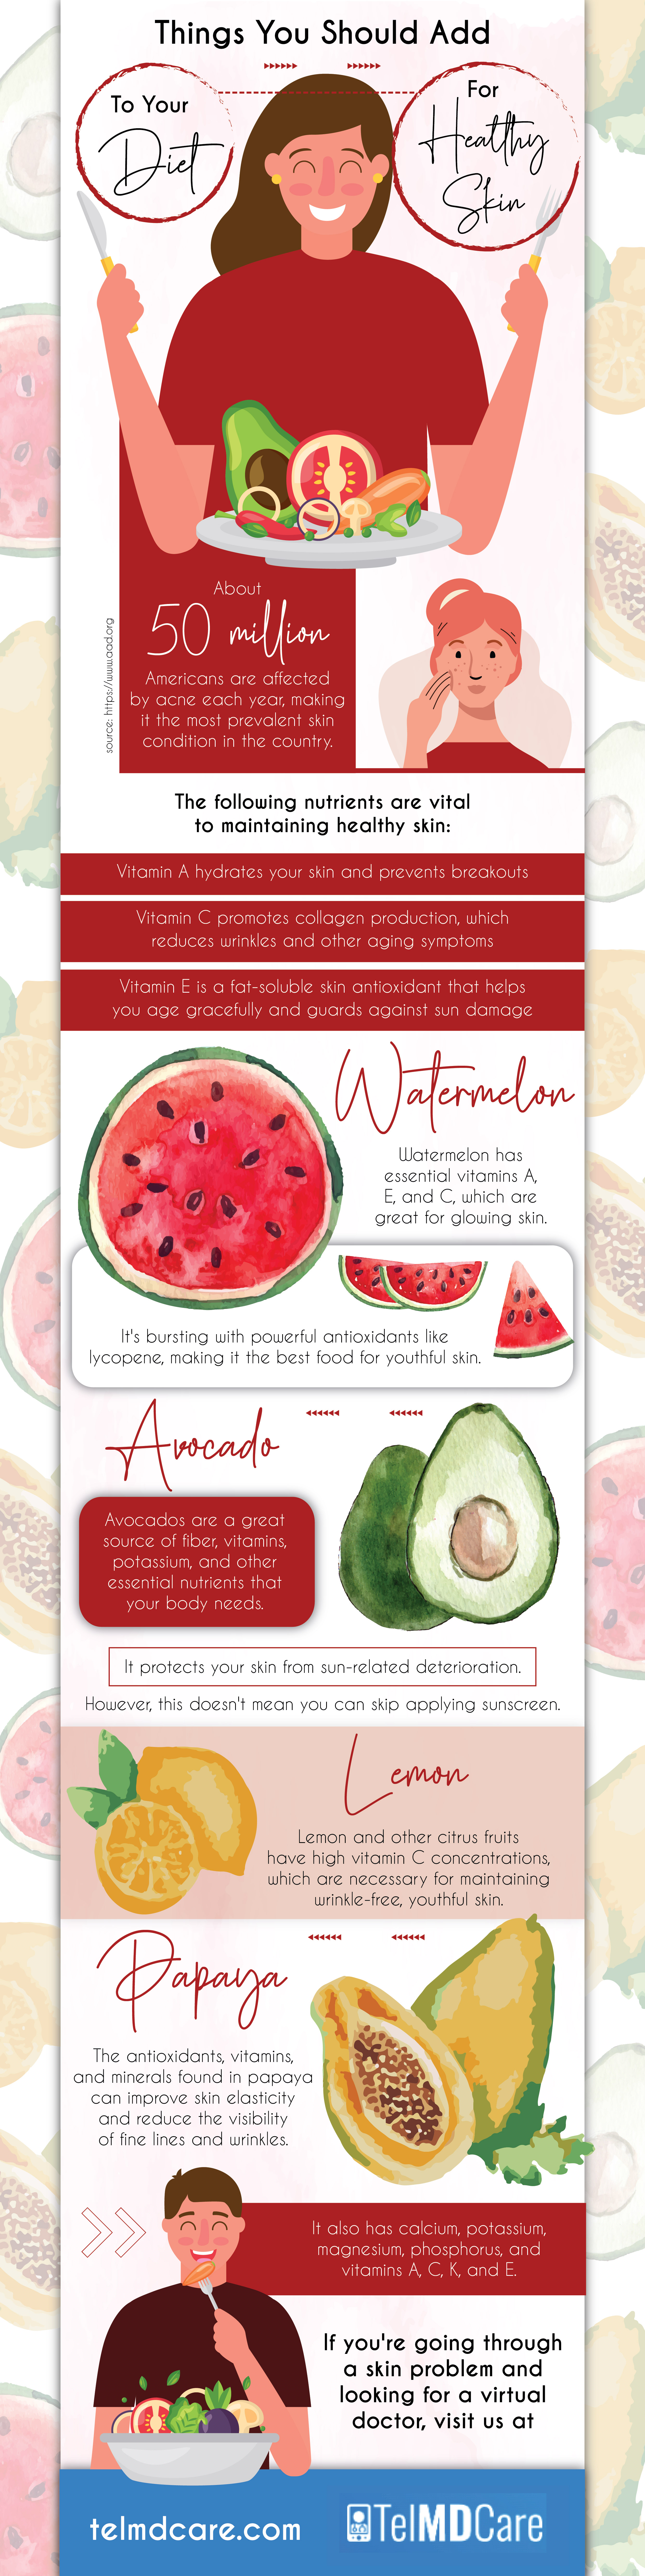 Things You Should Add To Your Diet For Healthy Skin